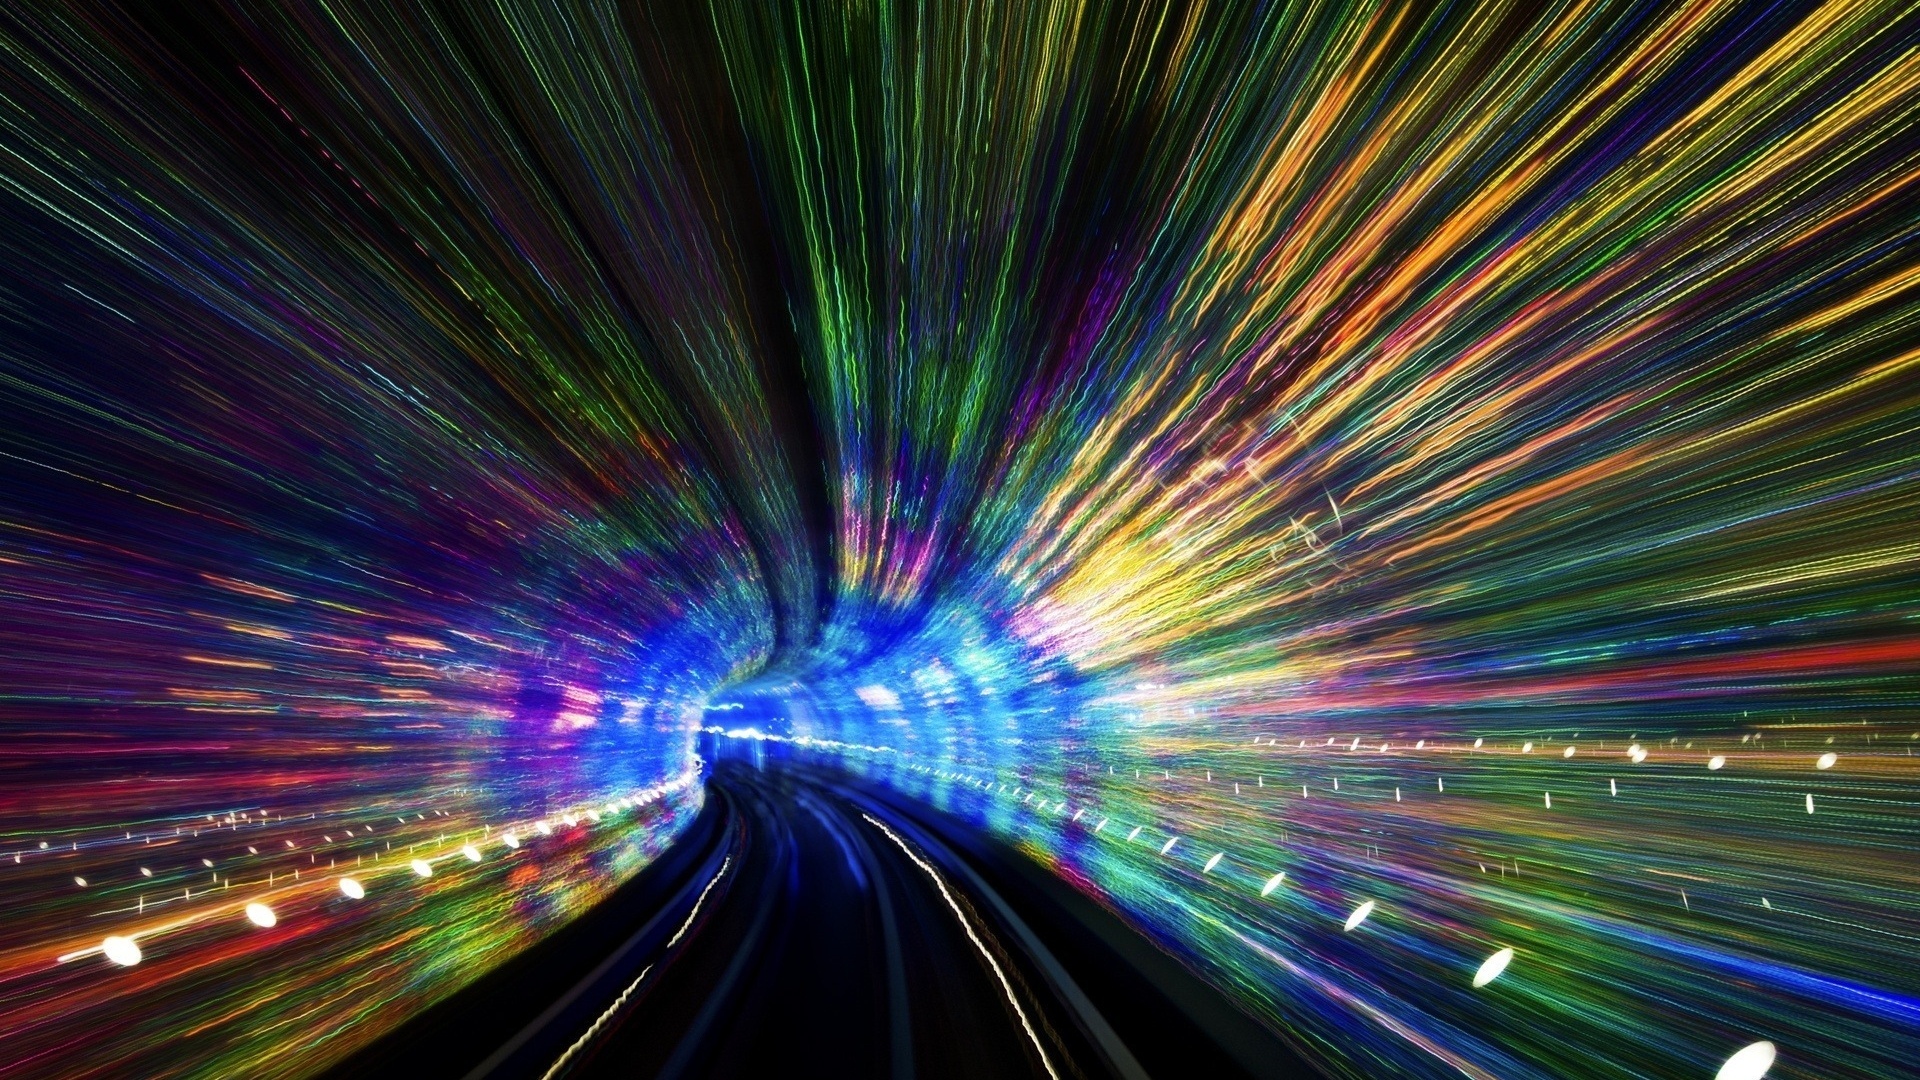 General 1920x1080 subway tunnel colorful motion blur lines railway